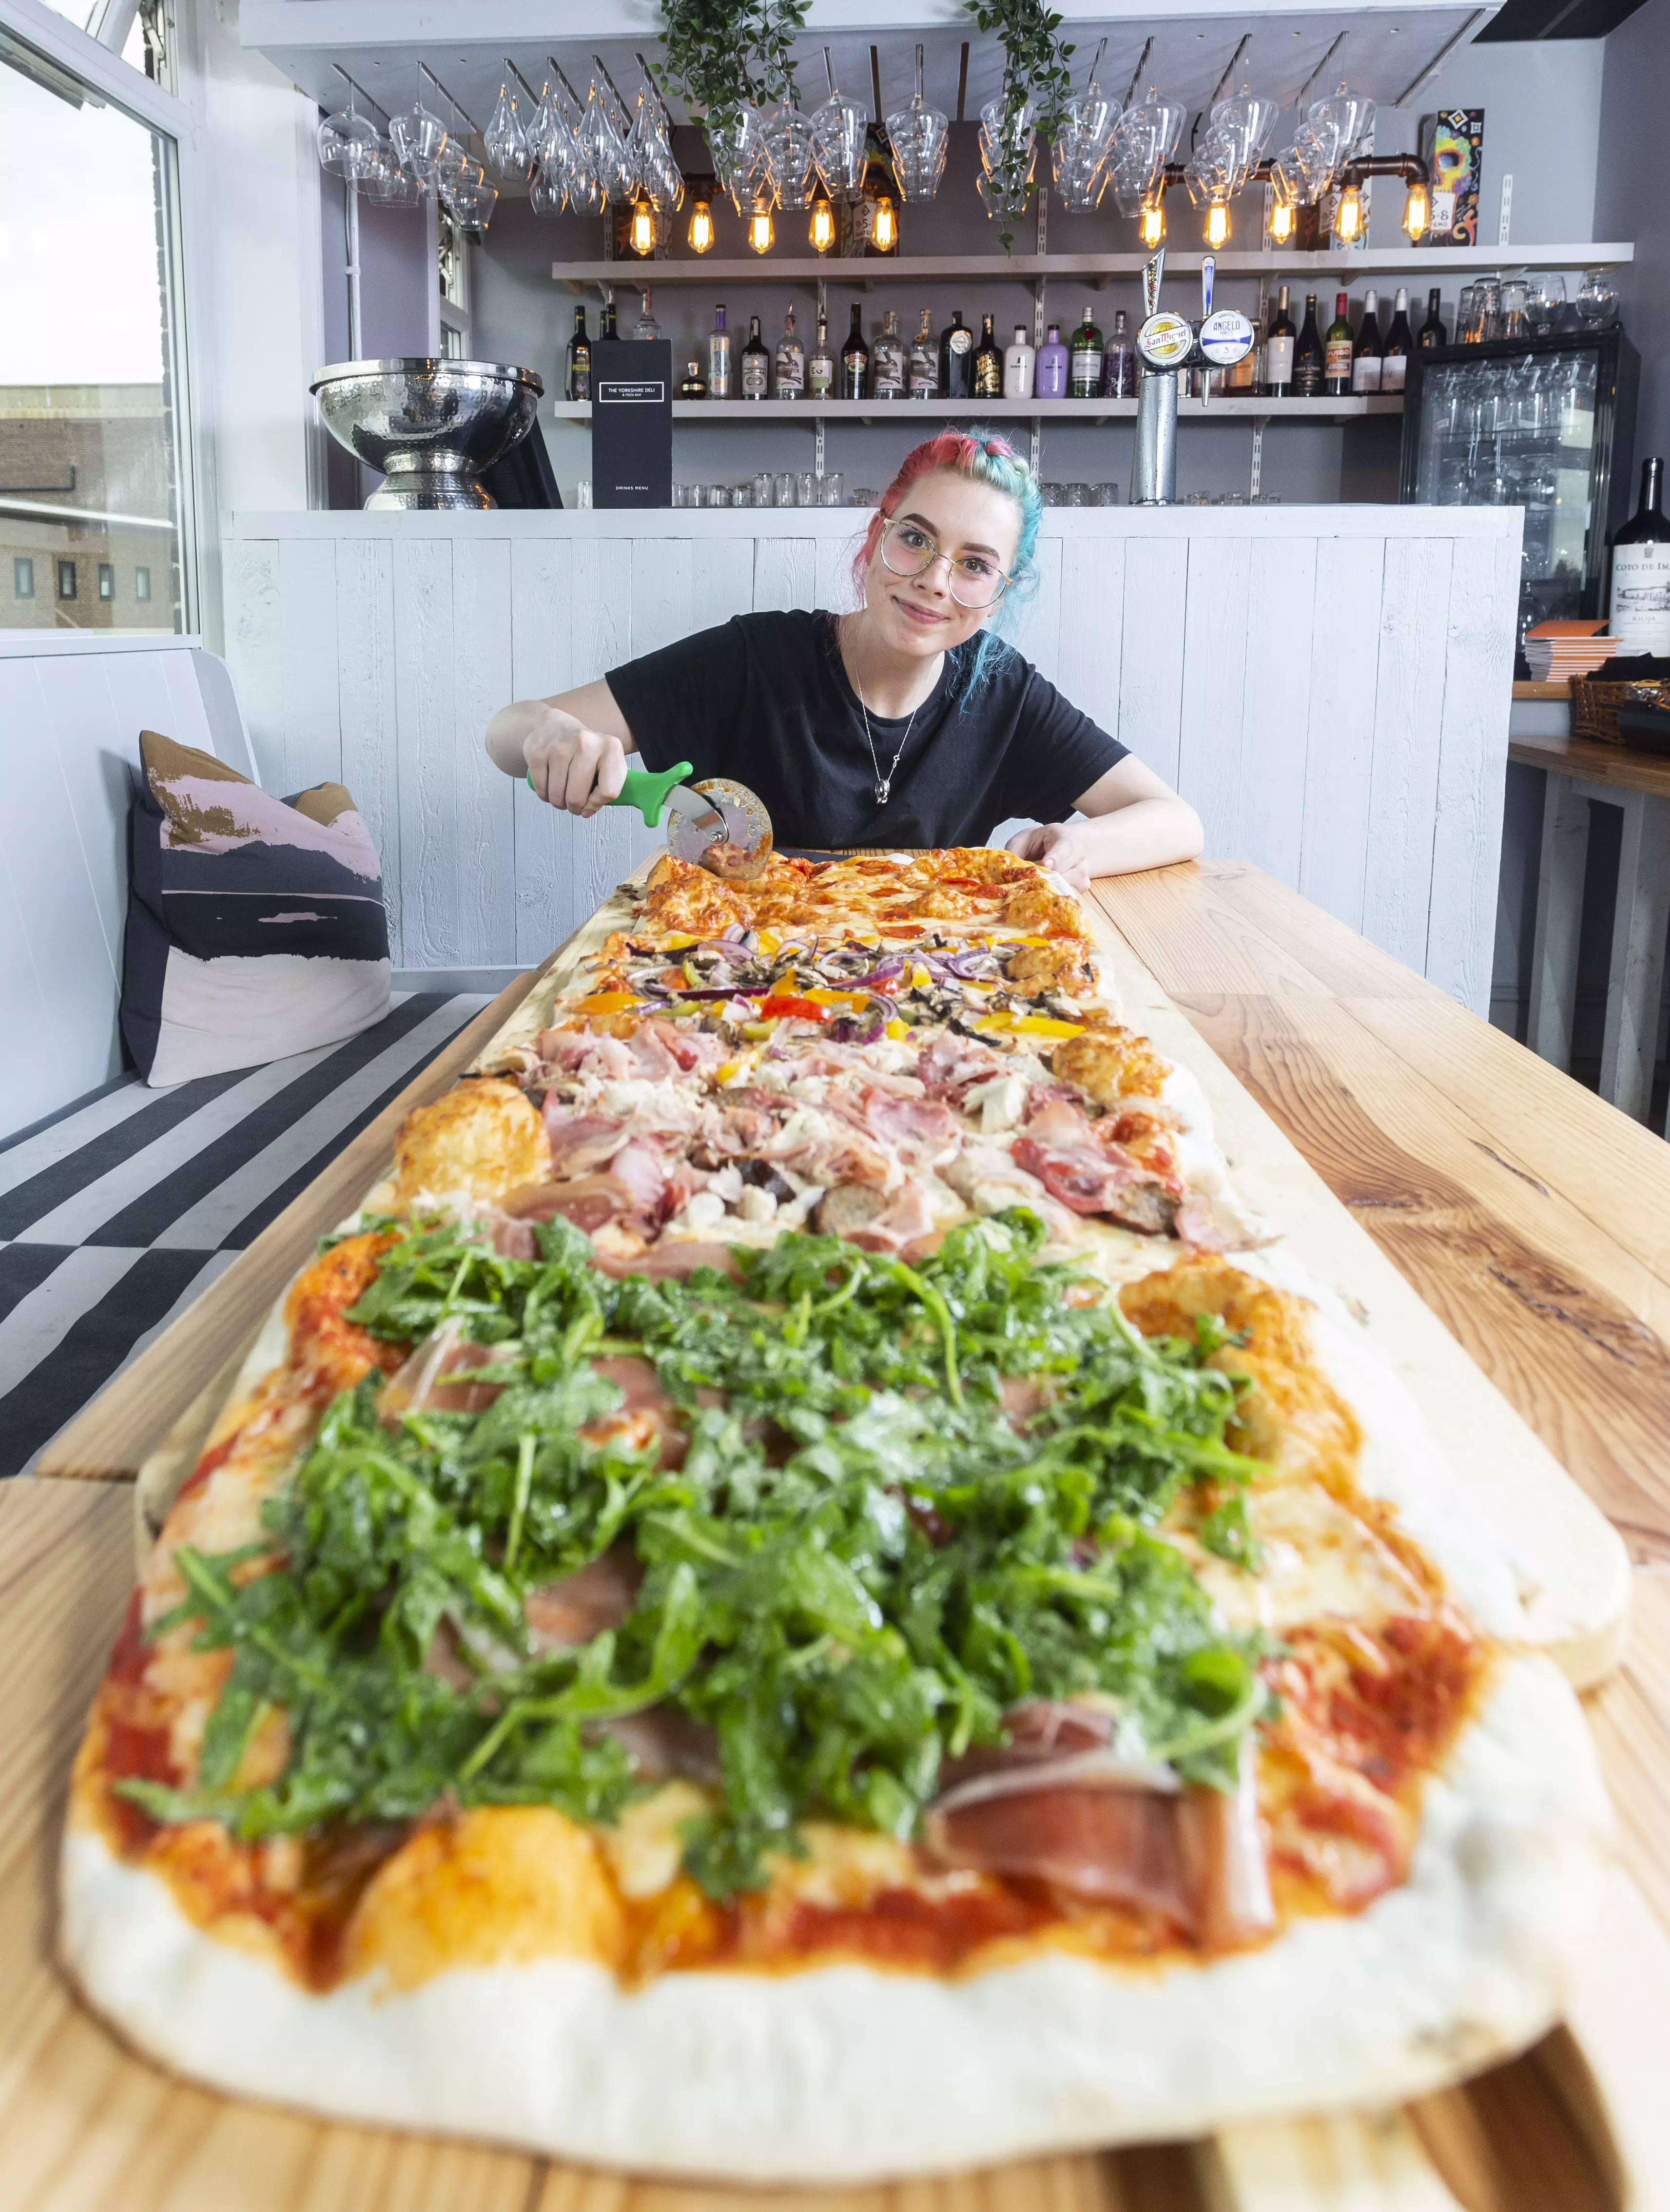 The epic pizza is one-metre long (